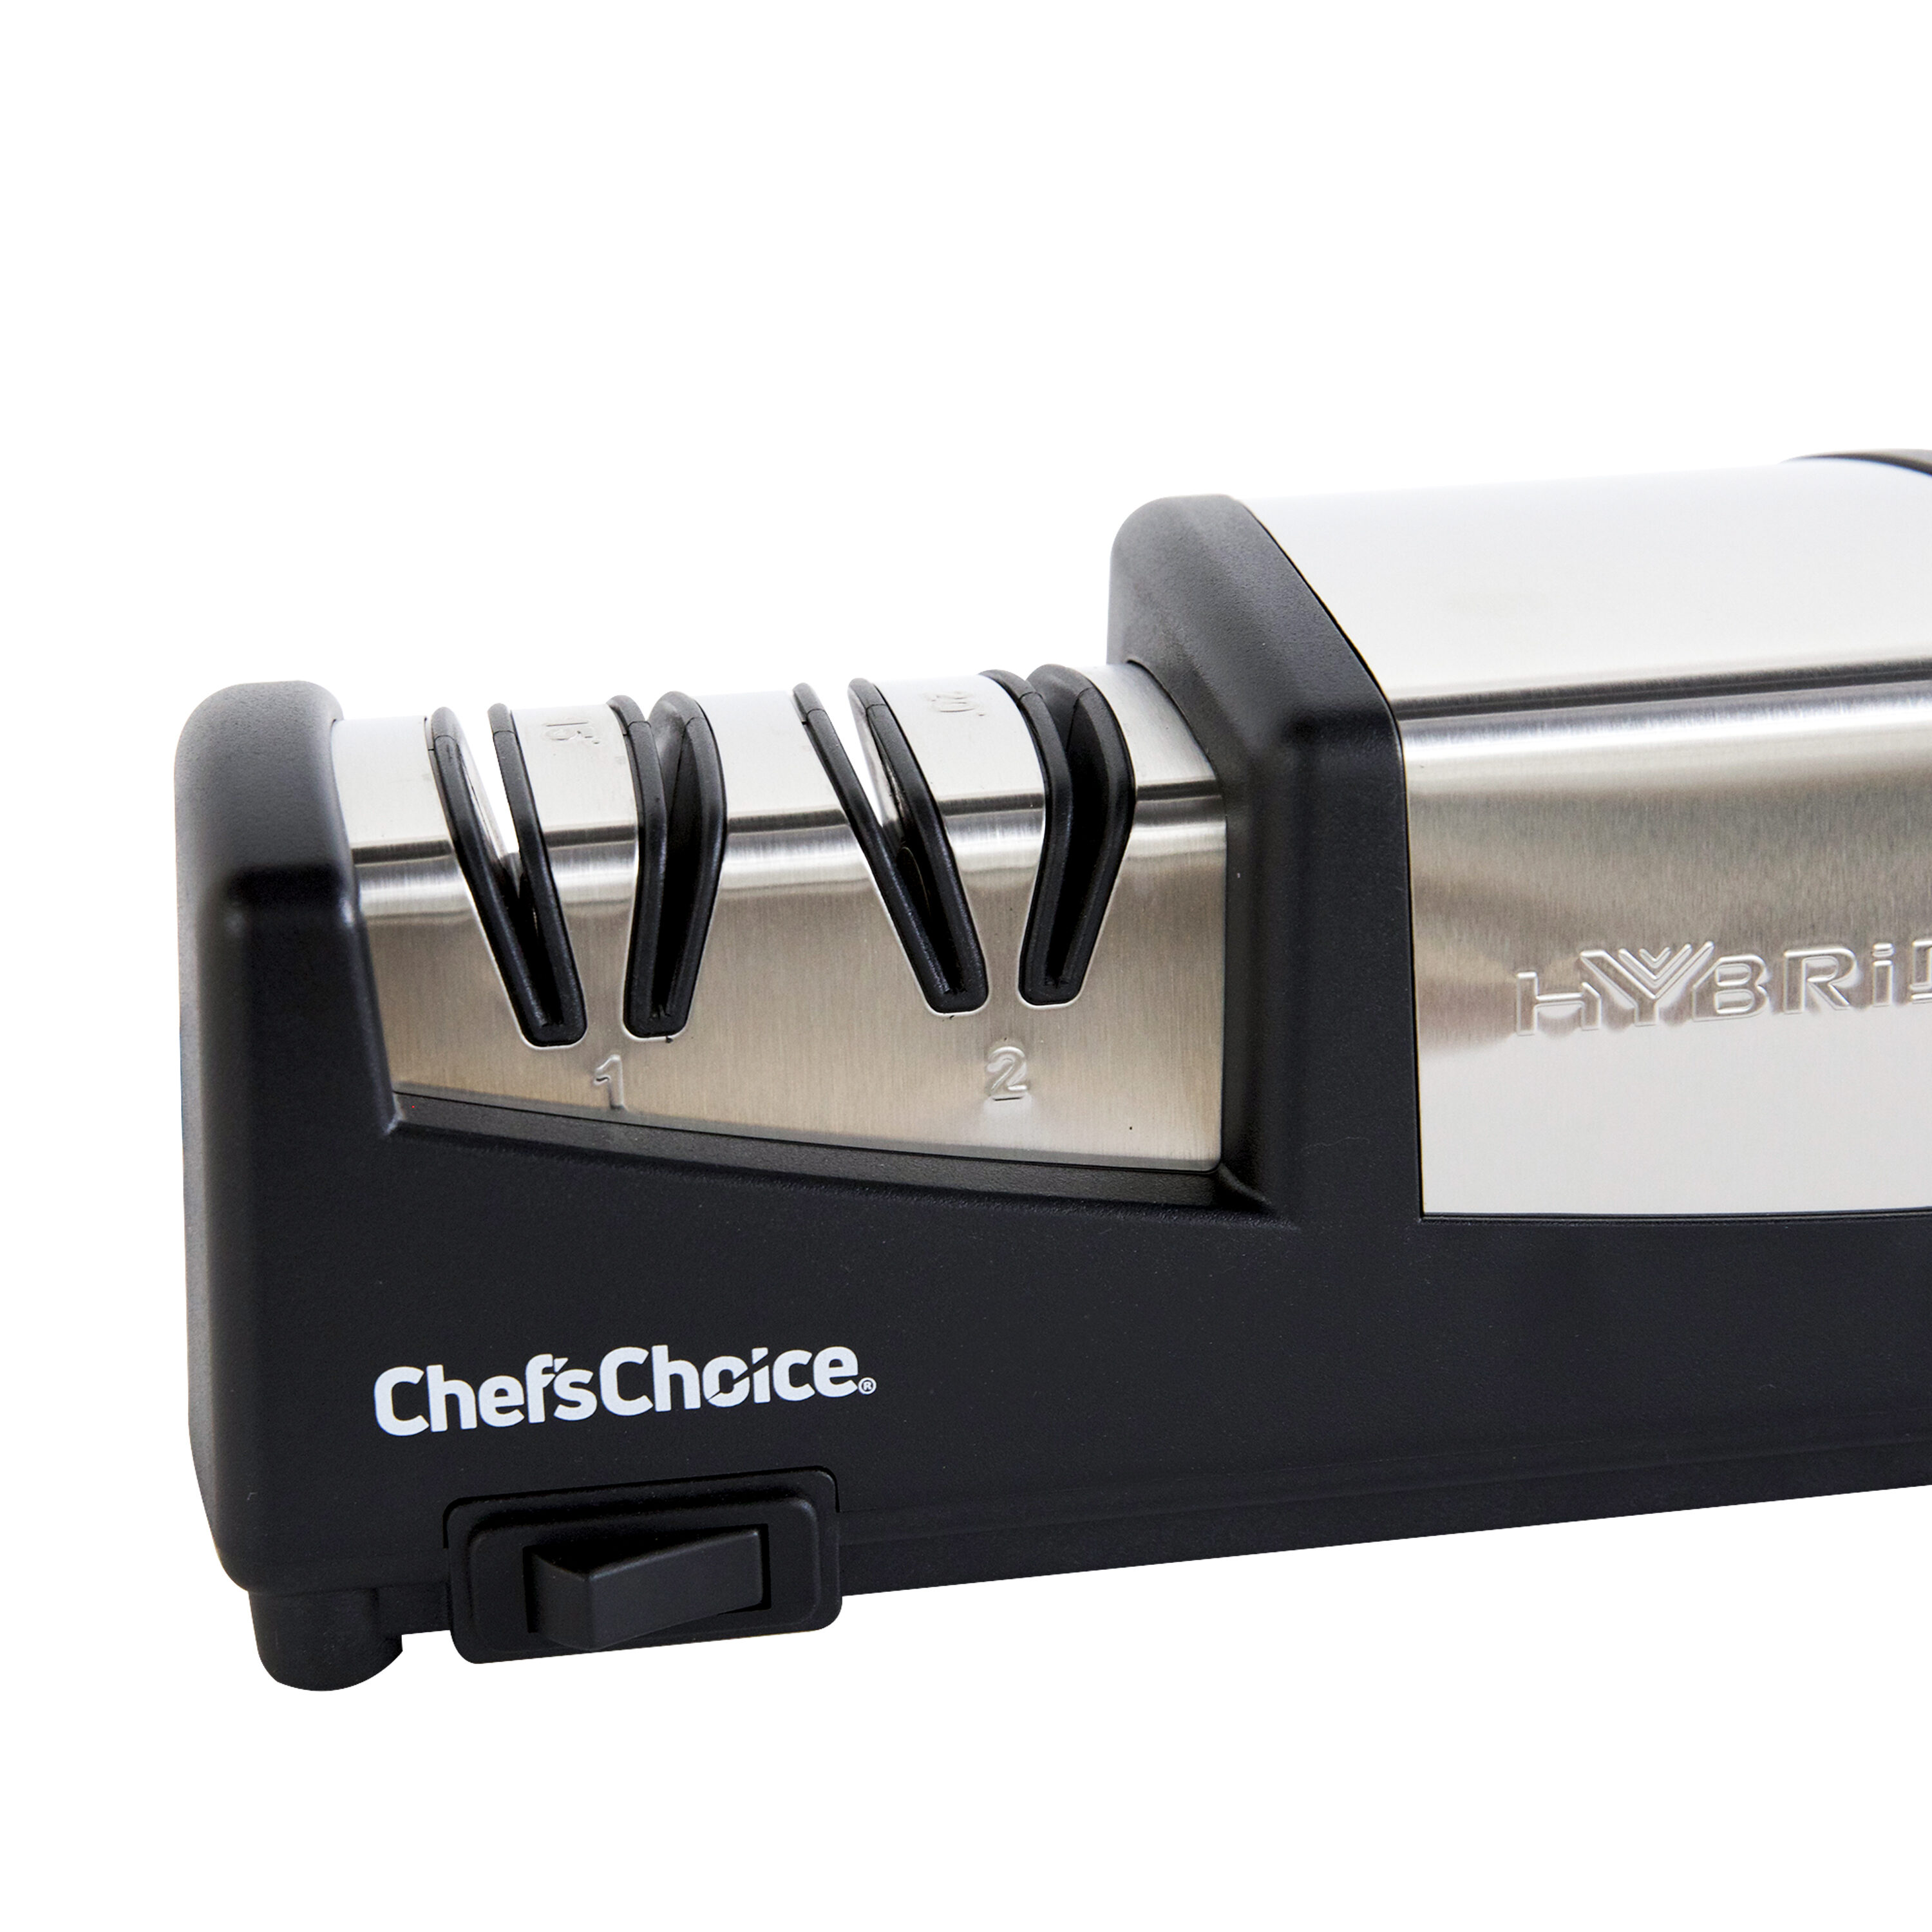  Chef'sChoice 15 Trizor XV EdgeSelect Professional Electric  Knife Sharpener for Straight and Serrated Knives & ProntoPro Diamond Hone  Manual Knife Sharpener Extremely Fast Sharpening, 3-Stage, Silver: Home &  Kitchen